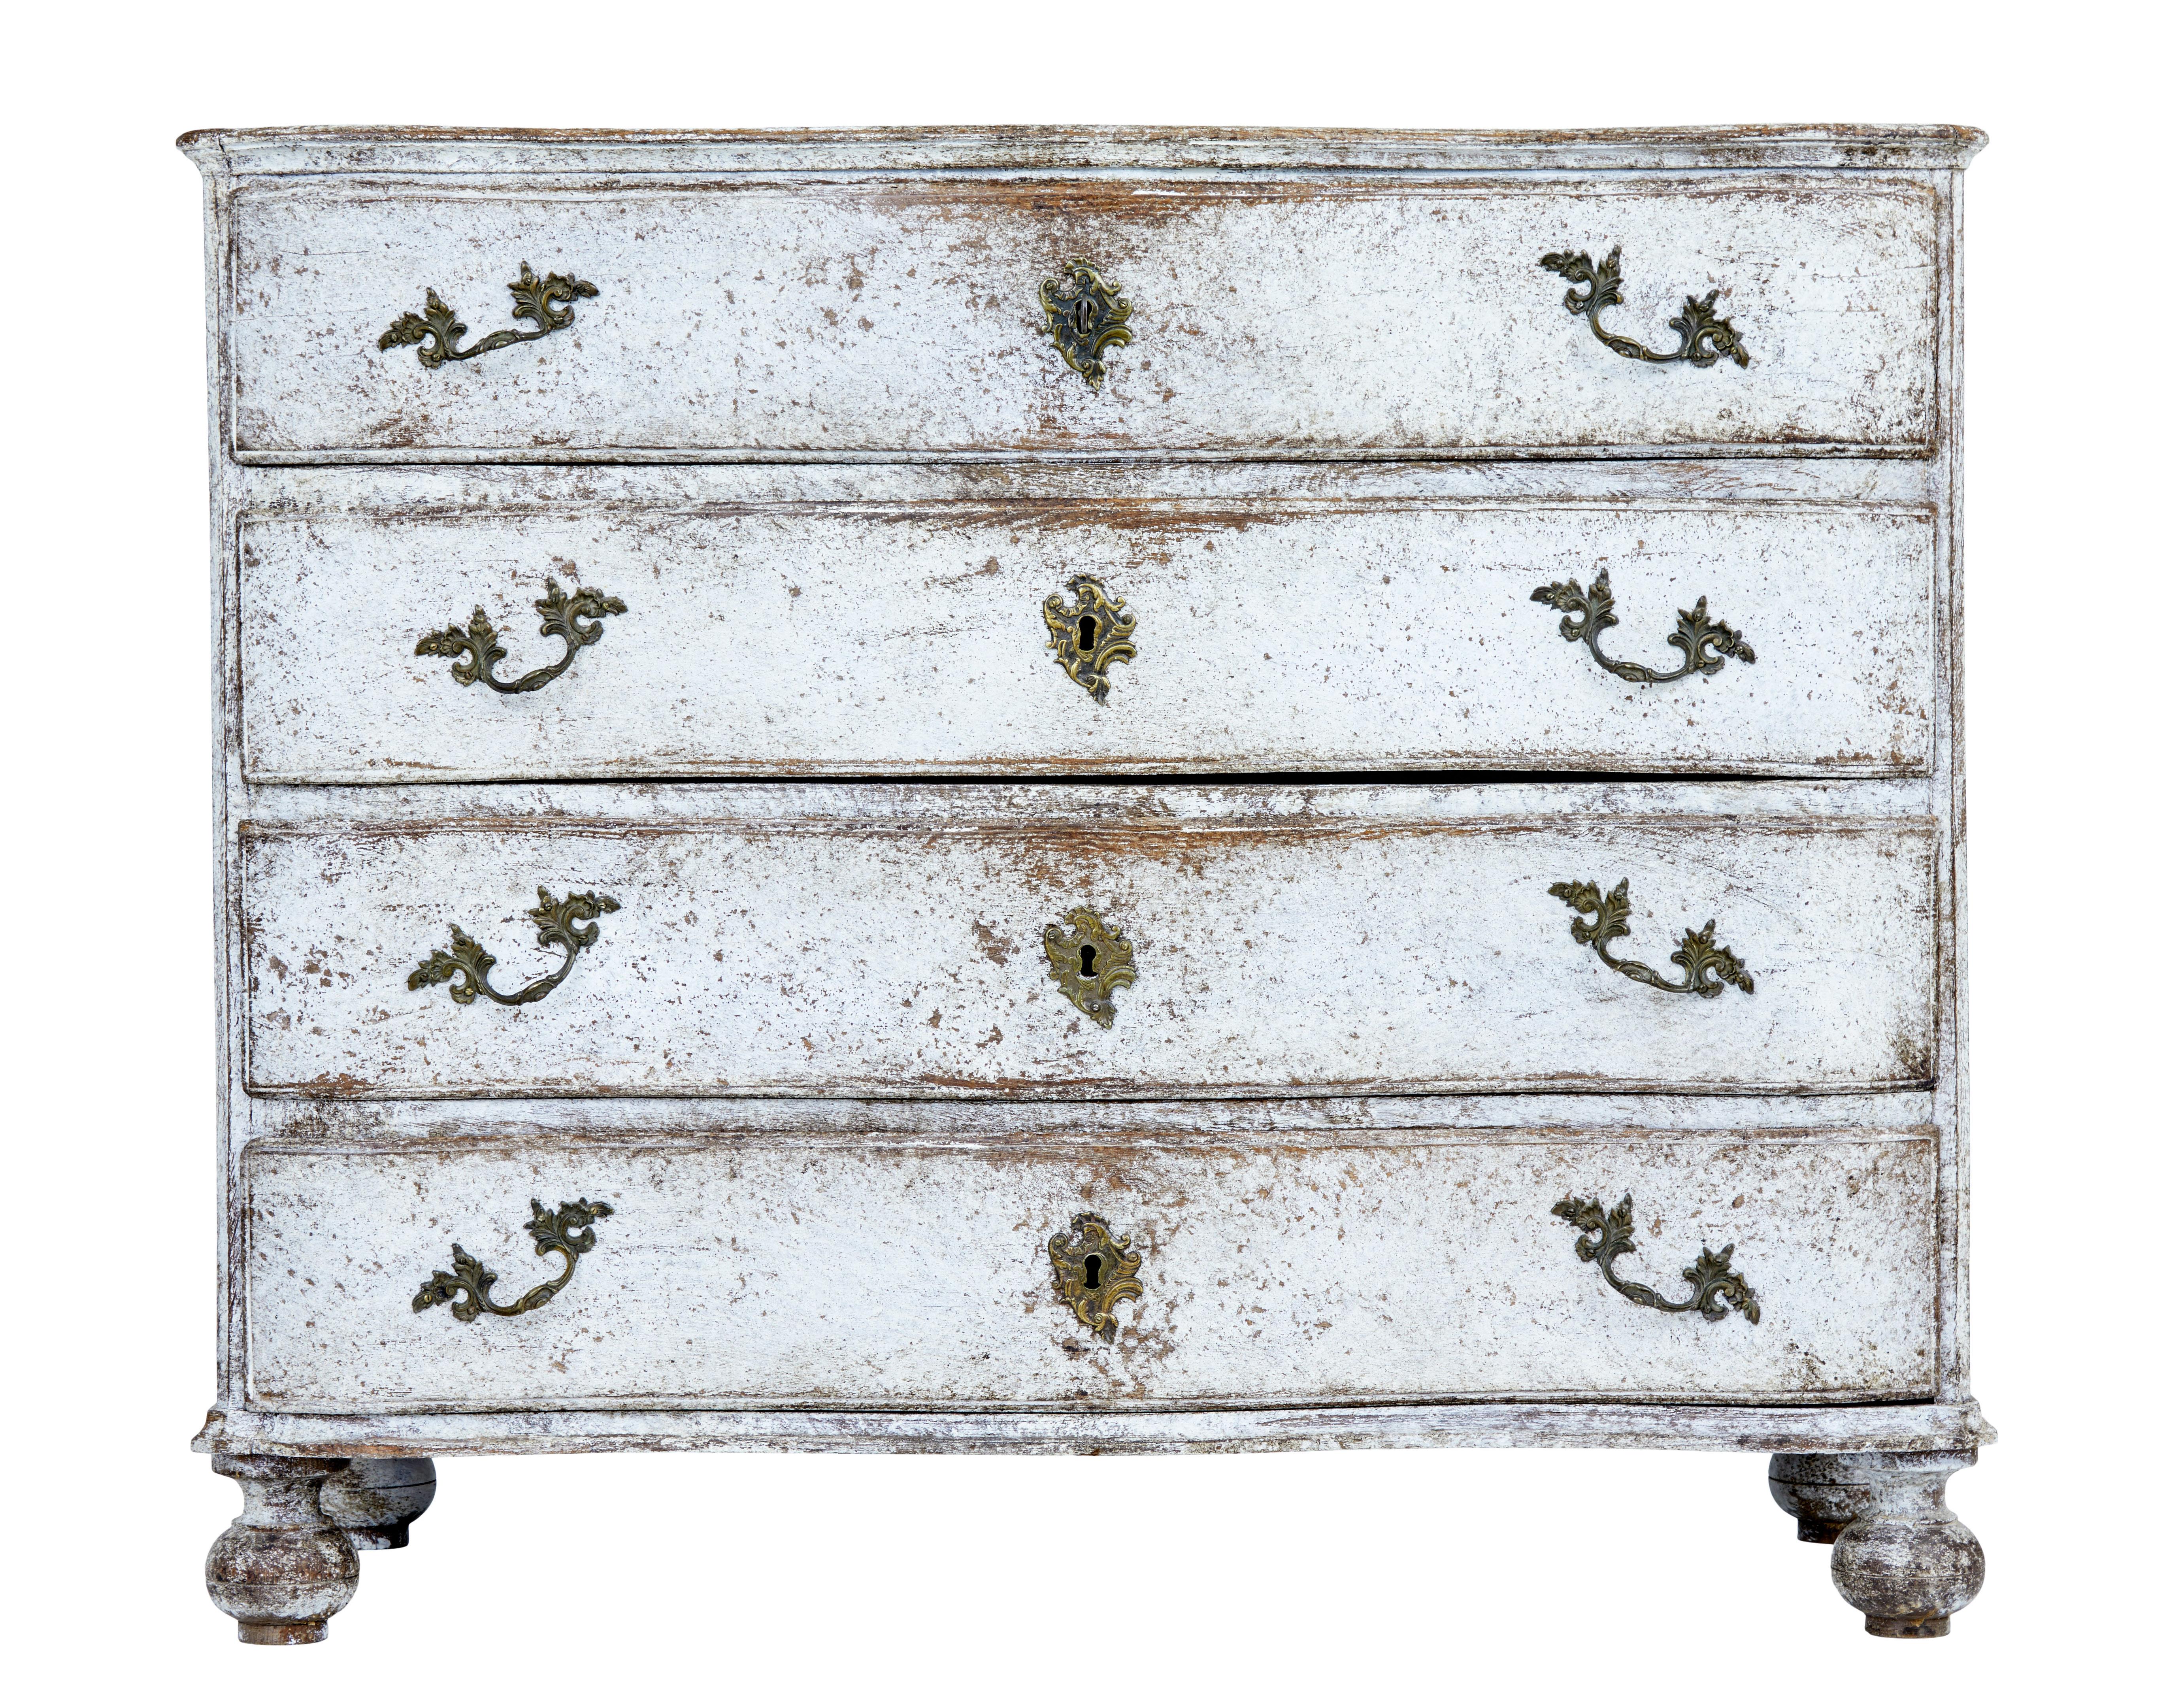 Fine quality solid oak chest of drawers, circa 1840.

Possibly Danish with later paint which has now taken on its current appearance.

4 drawers with shaped fronts, each with later decorative handles. Original handles to the sides.

Standing